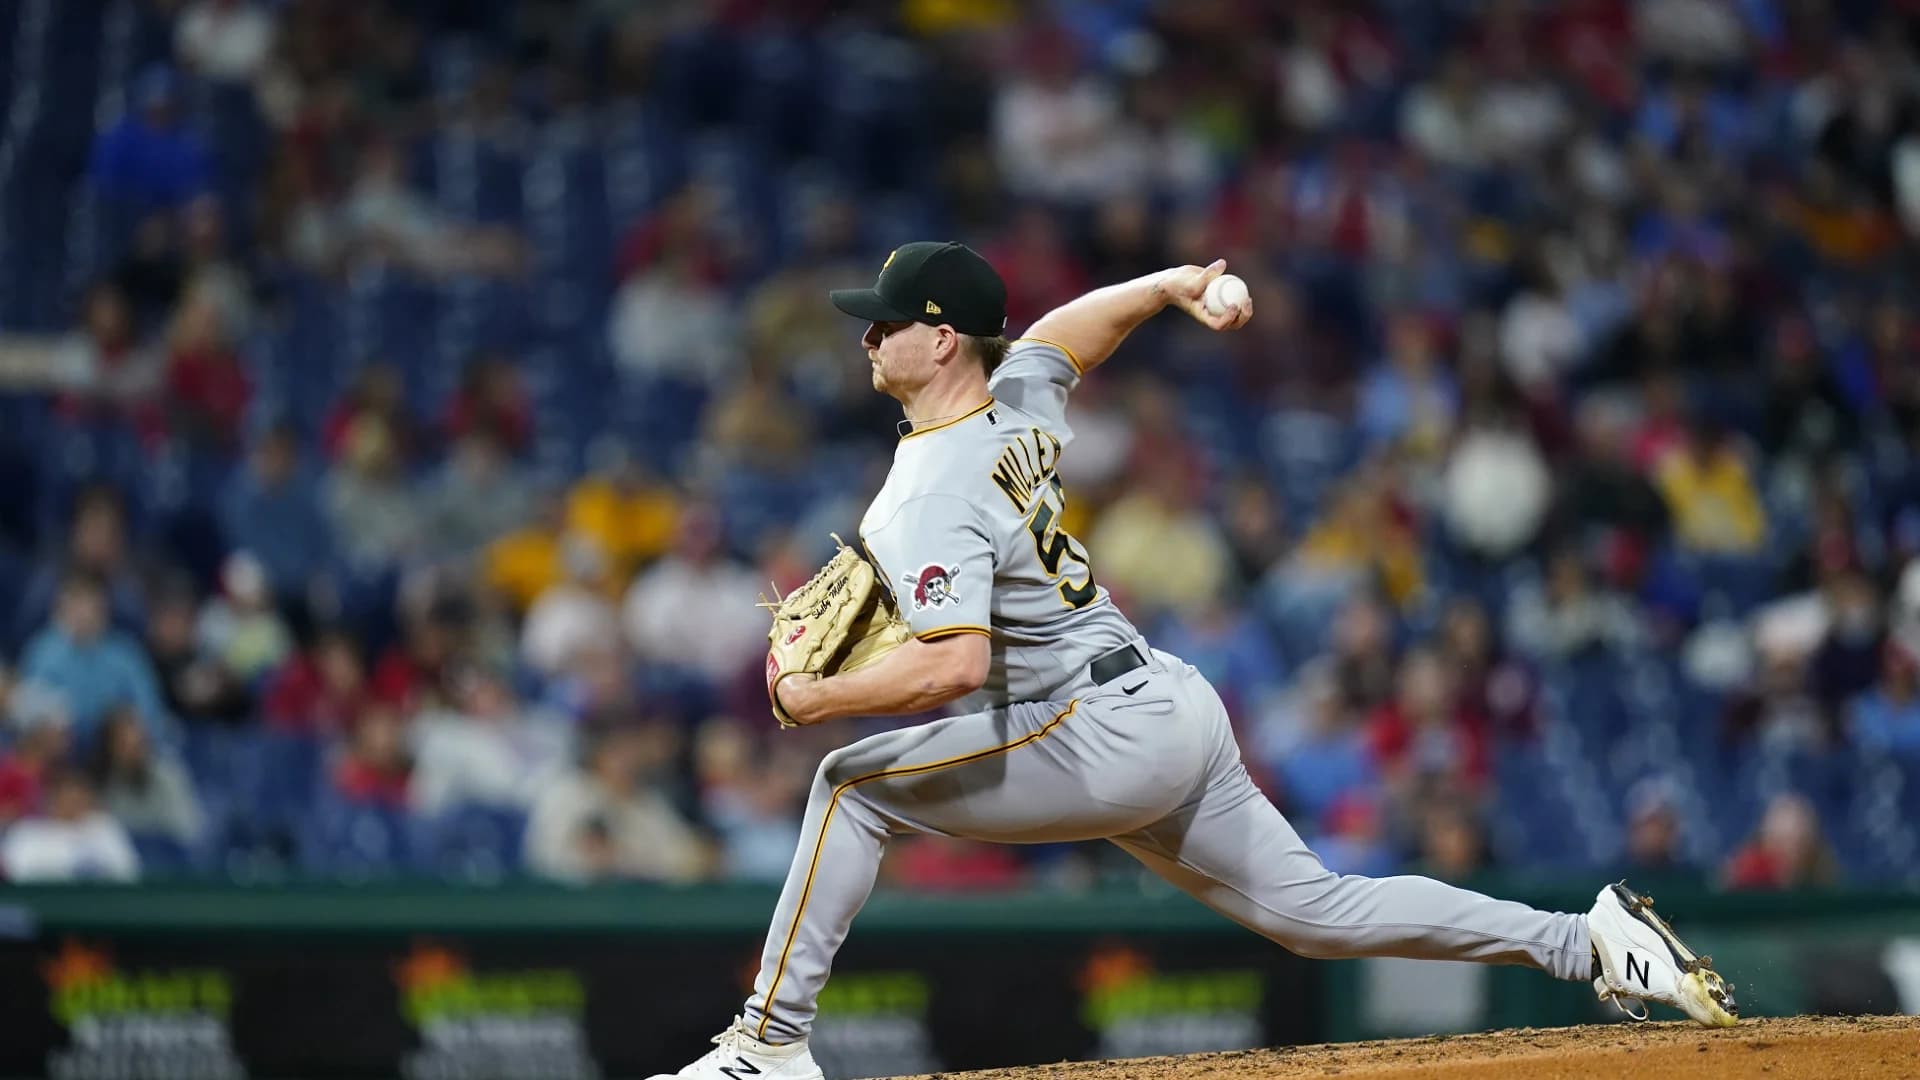 Yankees sign right-hander Shelby Miller to minor league deal